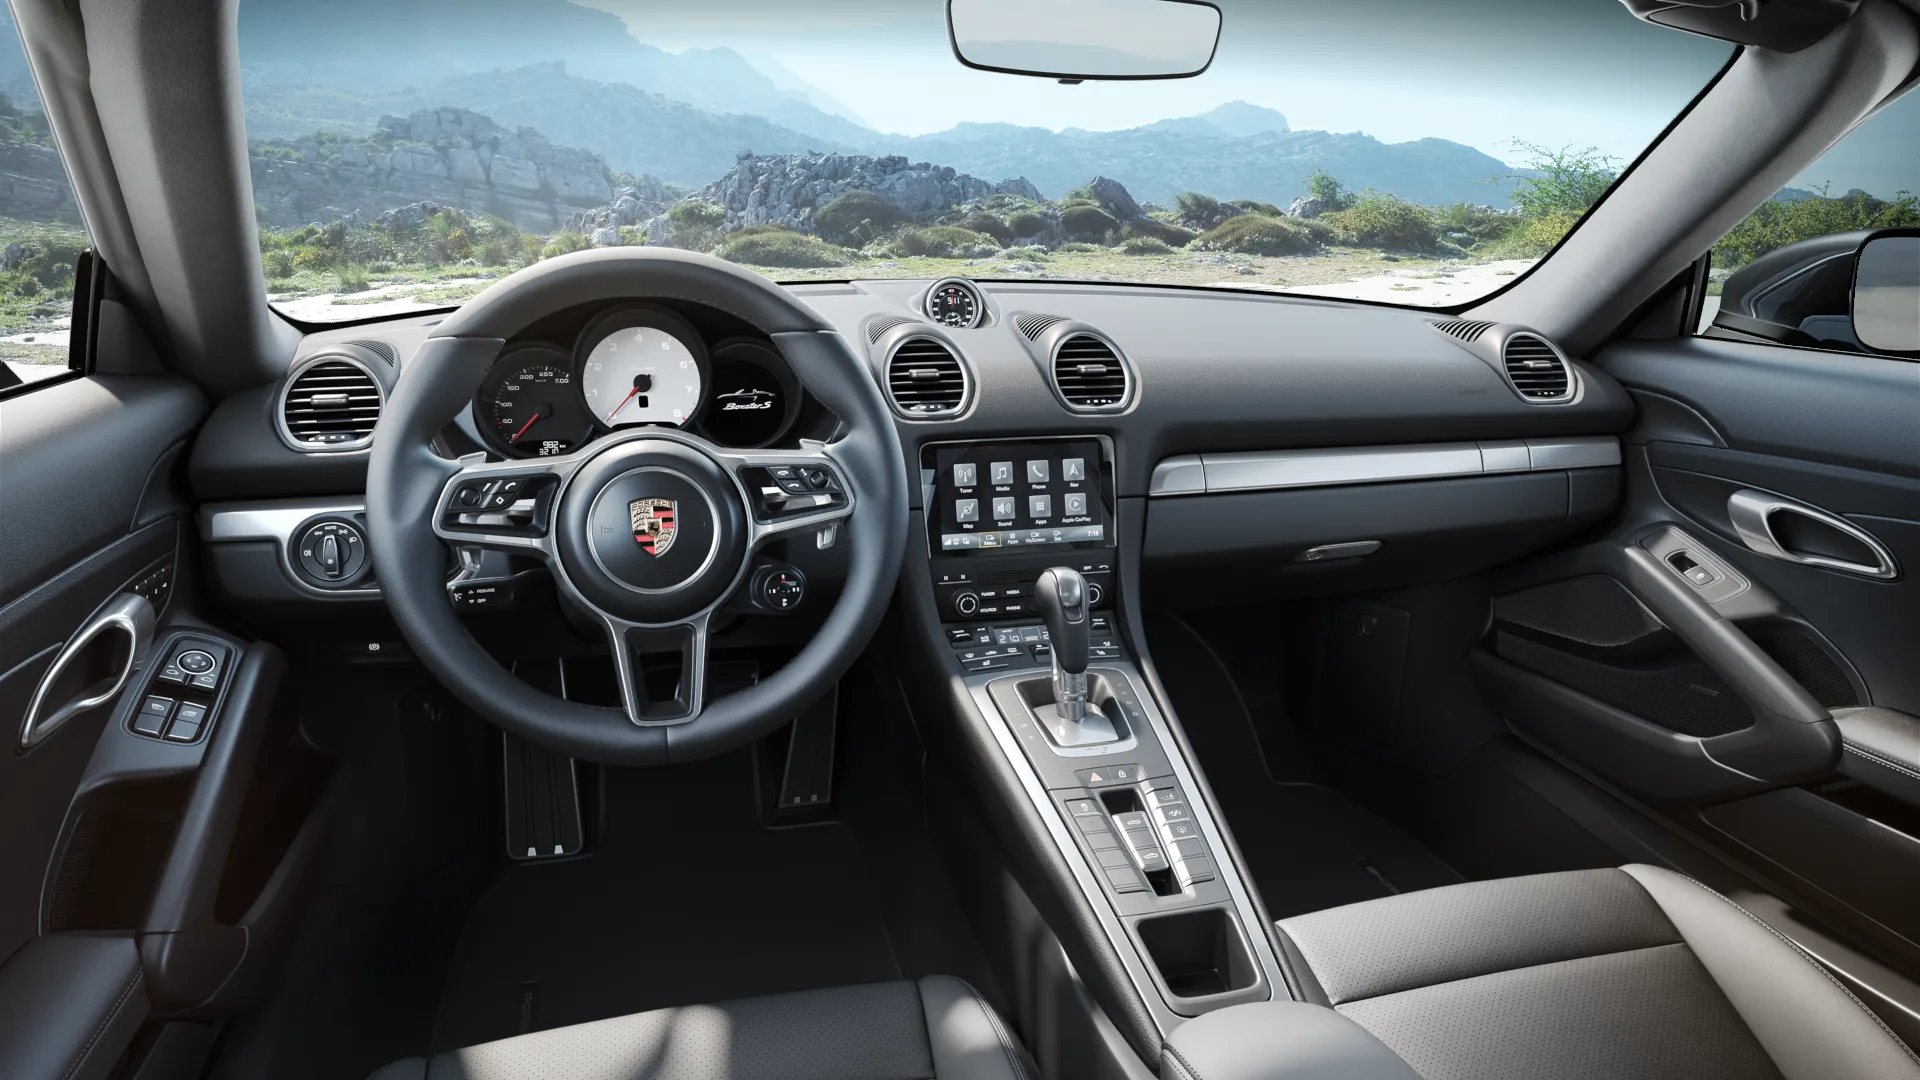 Interior view of 718 Boxster S